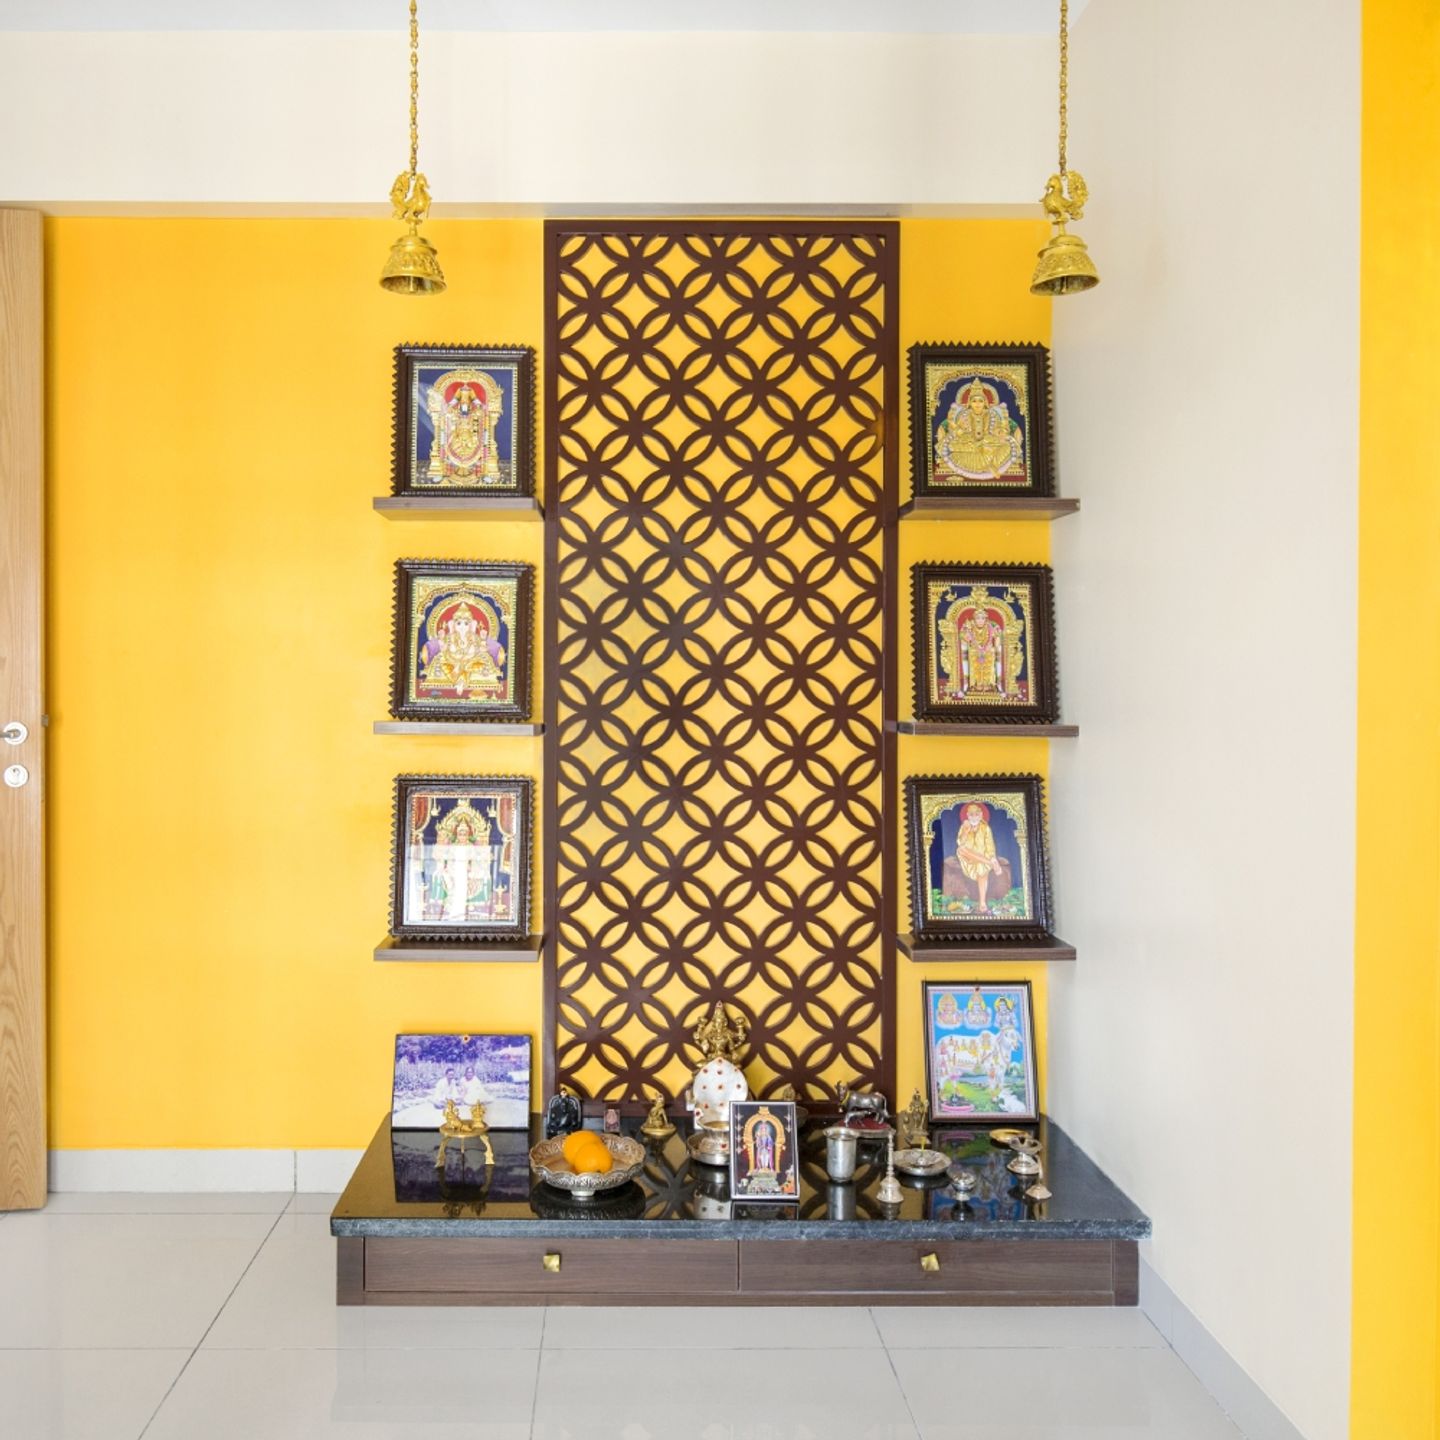 7x1x7 Ft Floor-Mounted Mandir Unit With CNC-Cut Wooden Panel And Yellow Accent Wall - Livspace